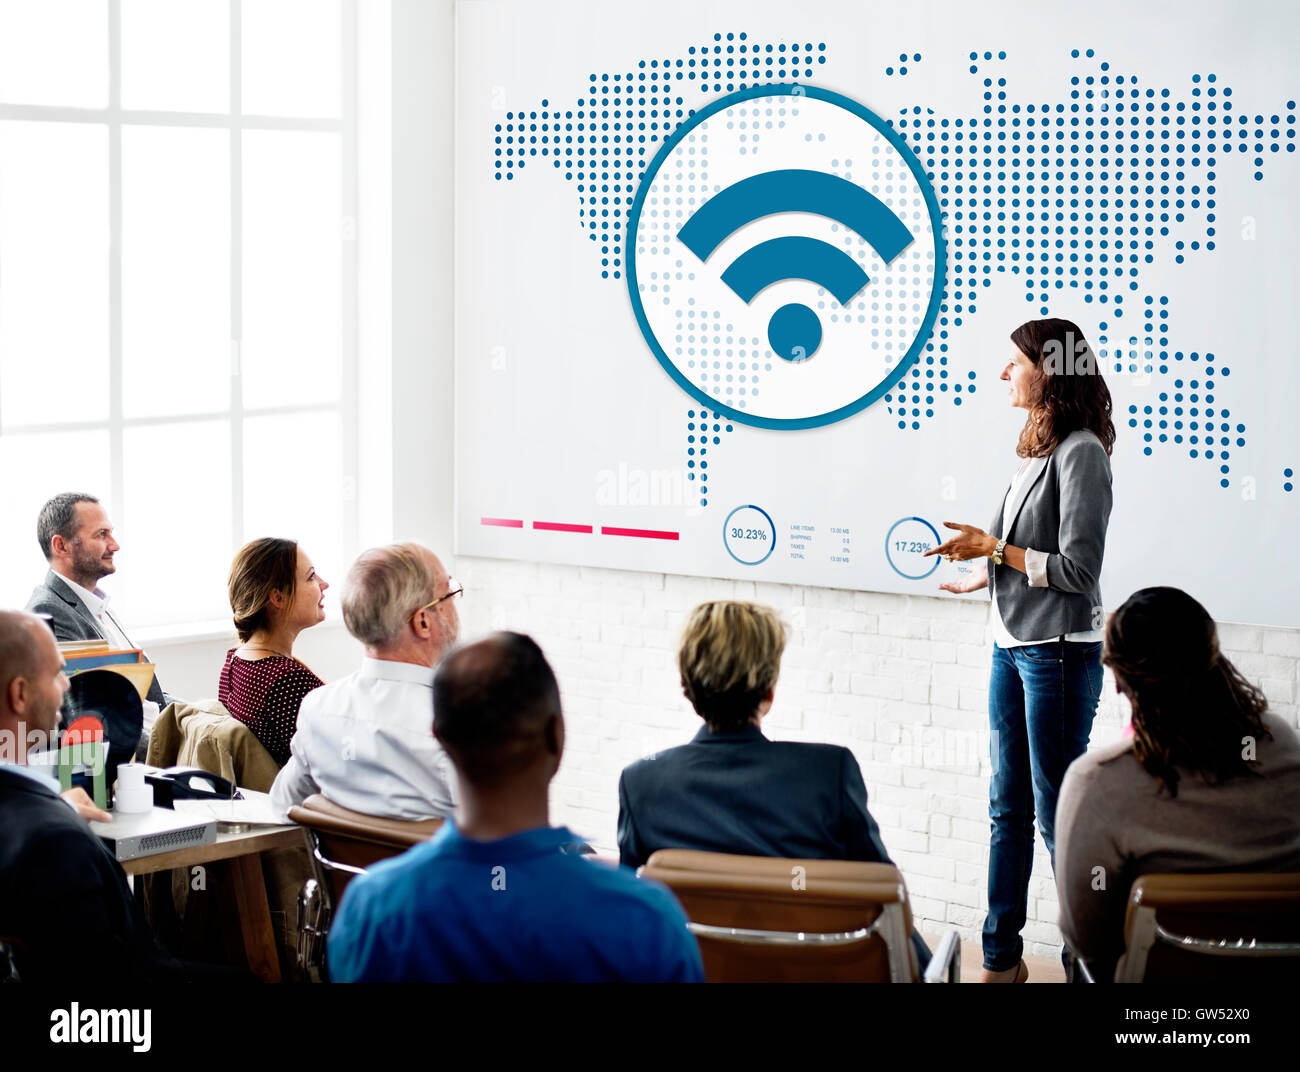 Global Communications Wireless Technology Connection Concept Stock Photo